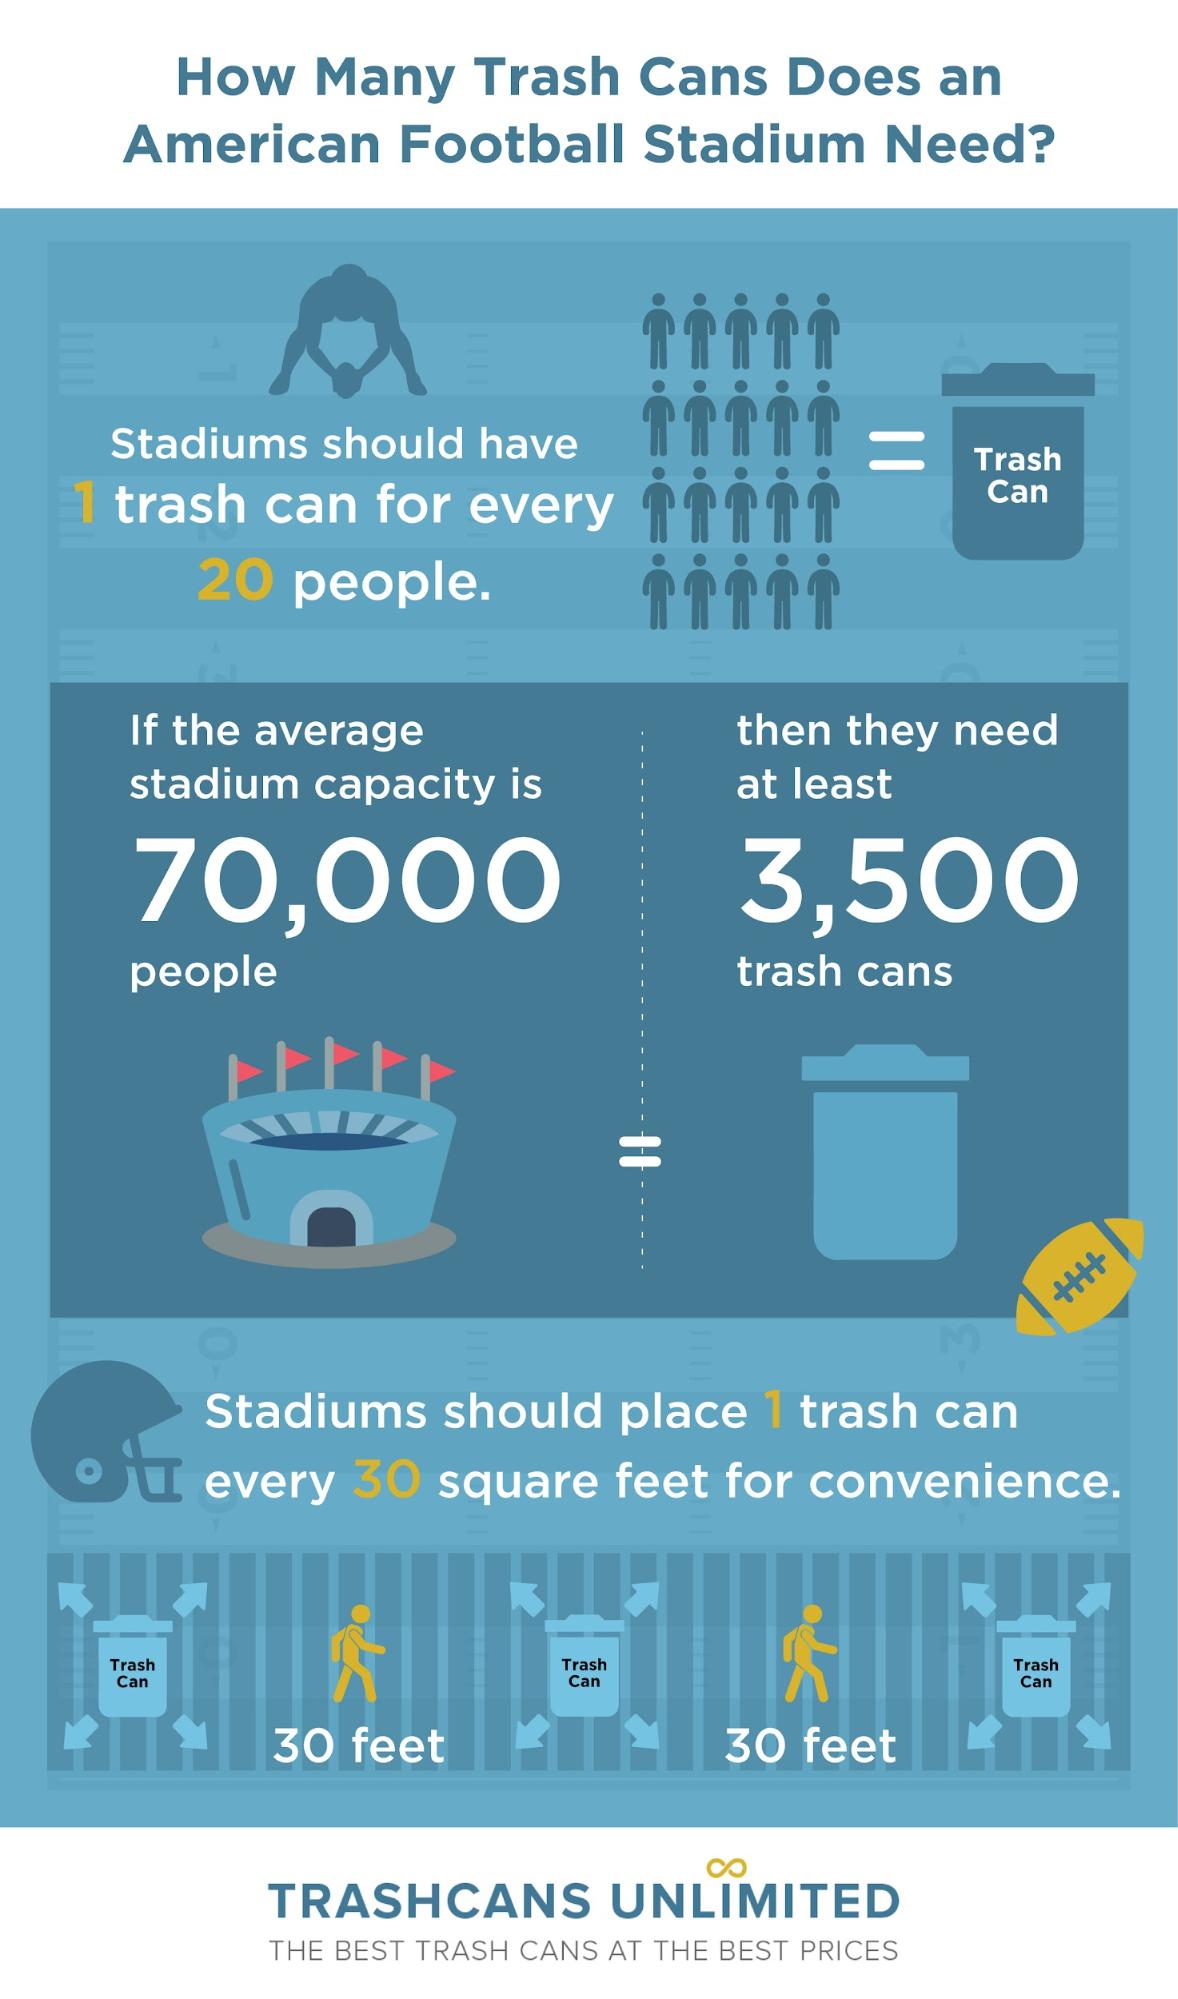 How Many Trash Can Does an American Football Stadium Need